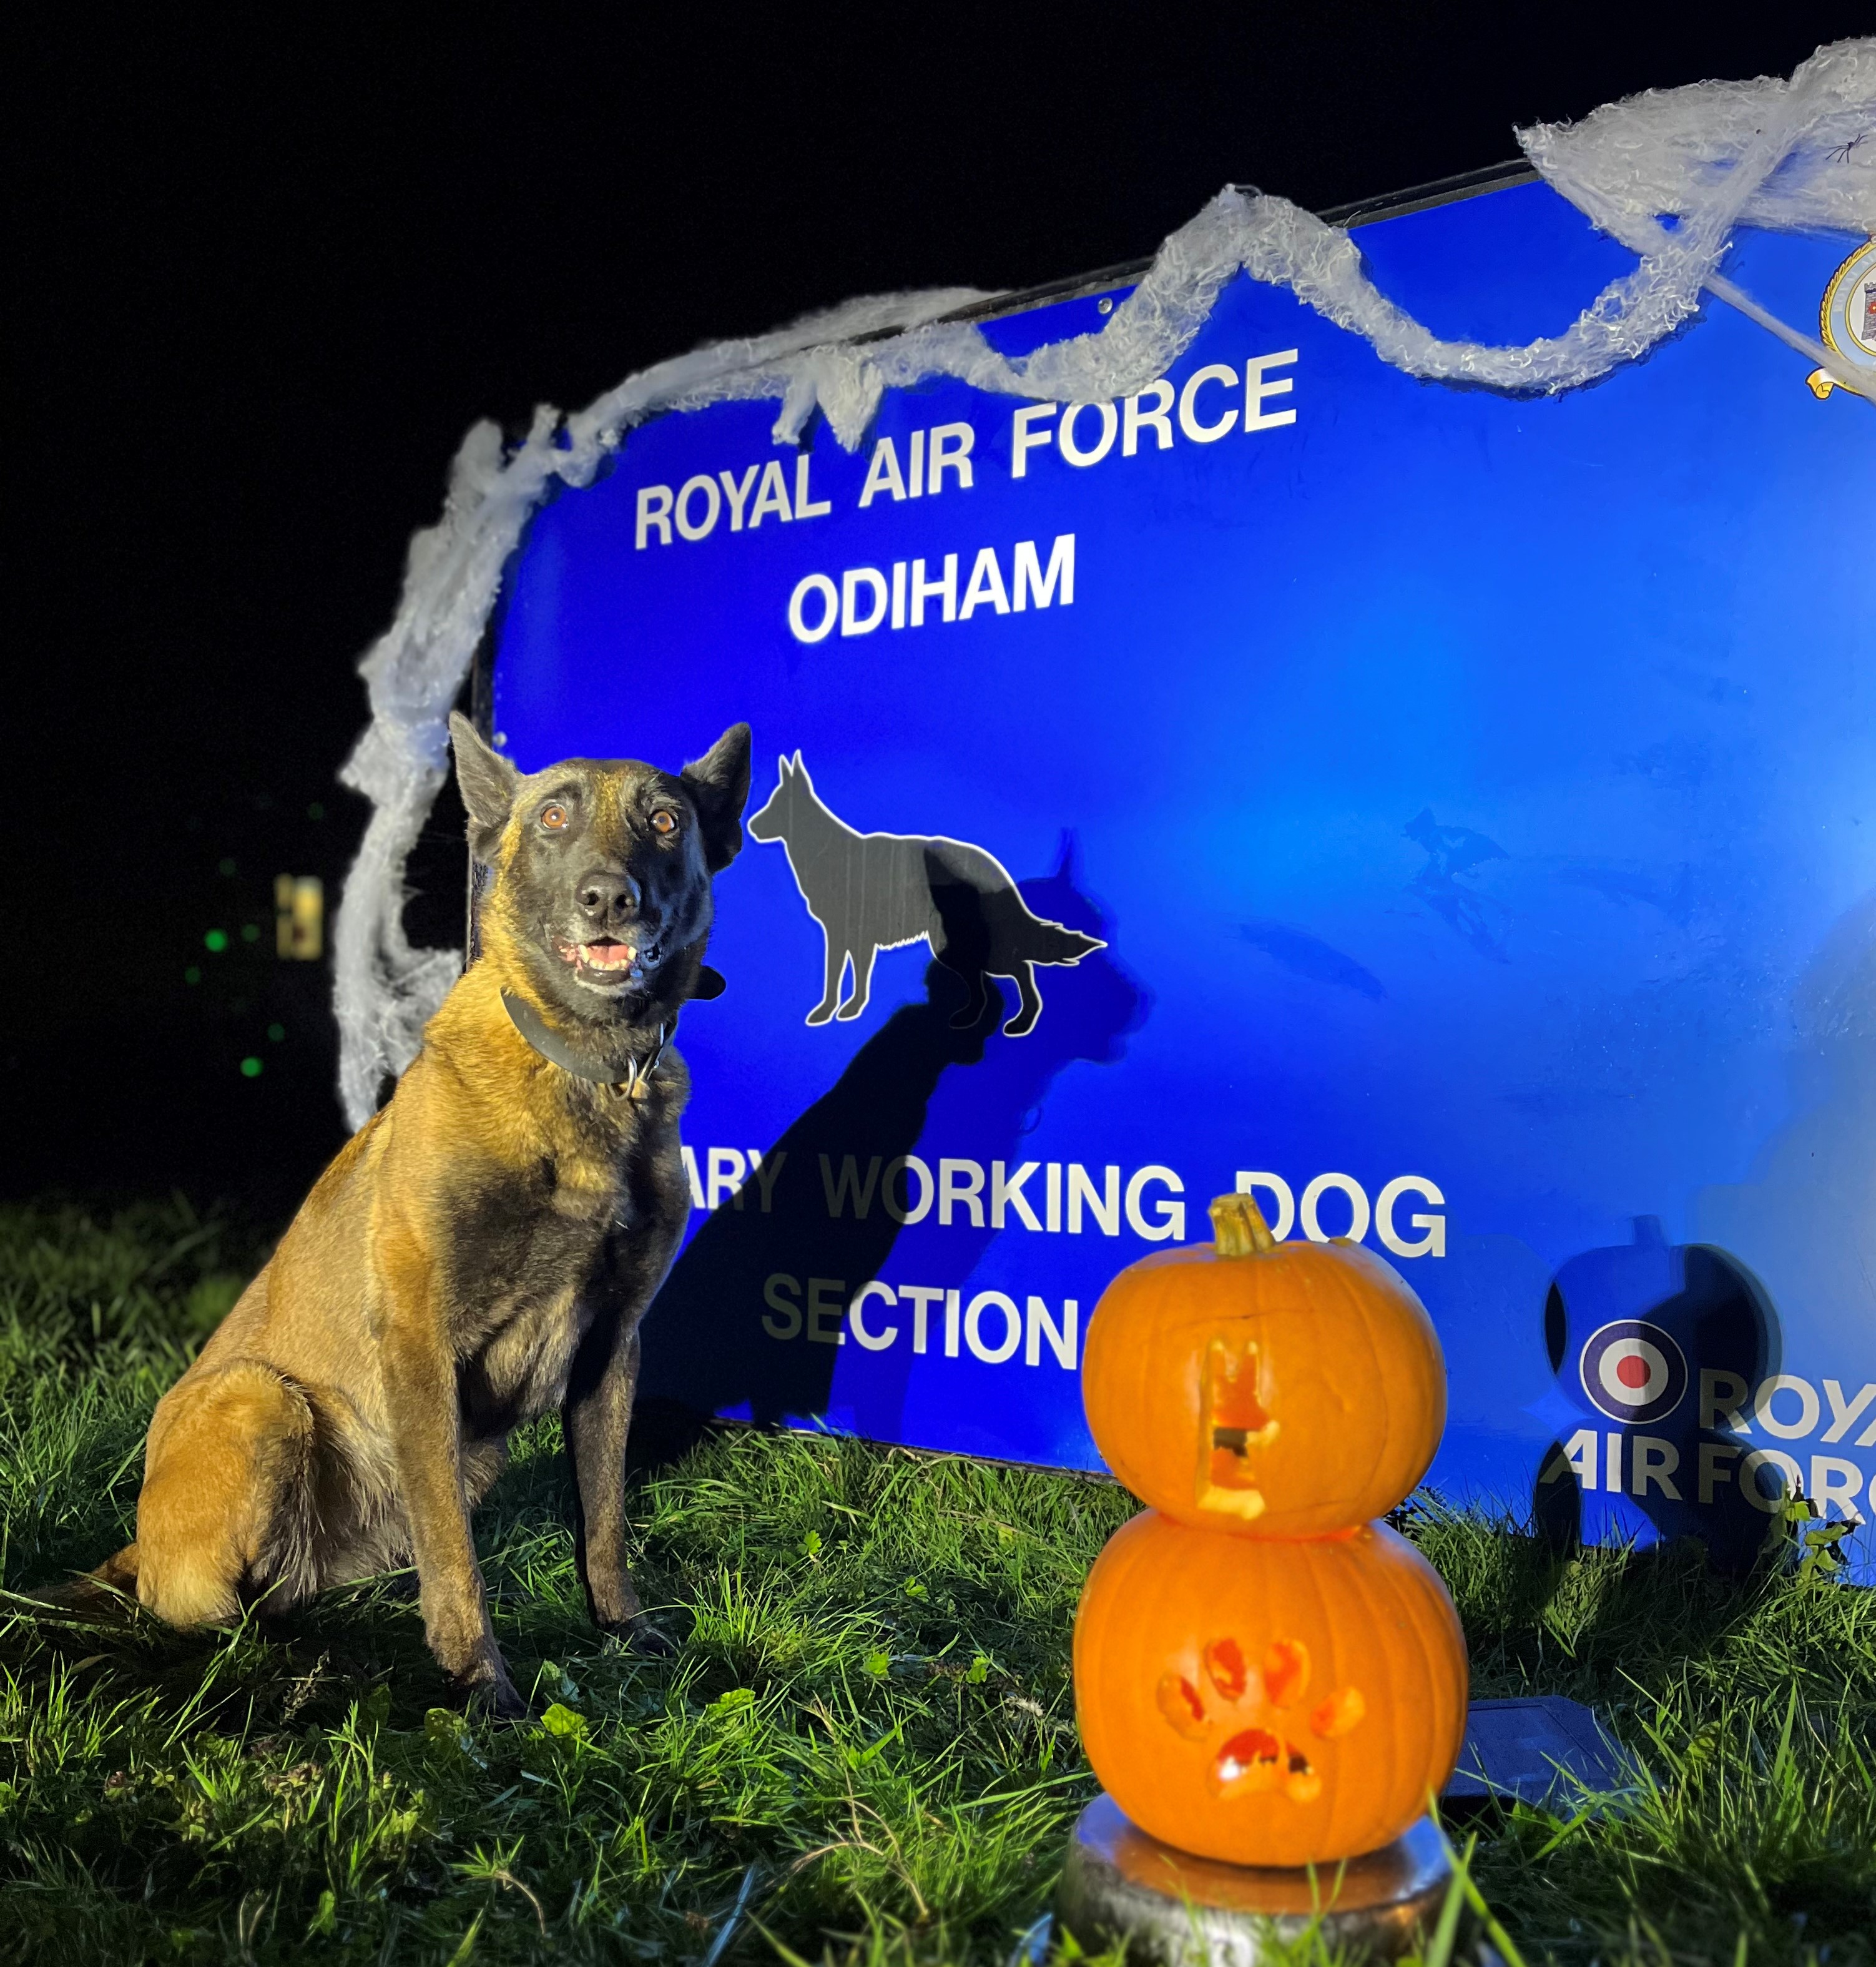 Image shows Military Working Dog sitting by a sign for RAF Odiham and pumpkins.